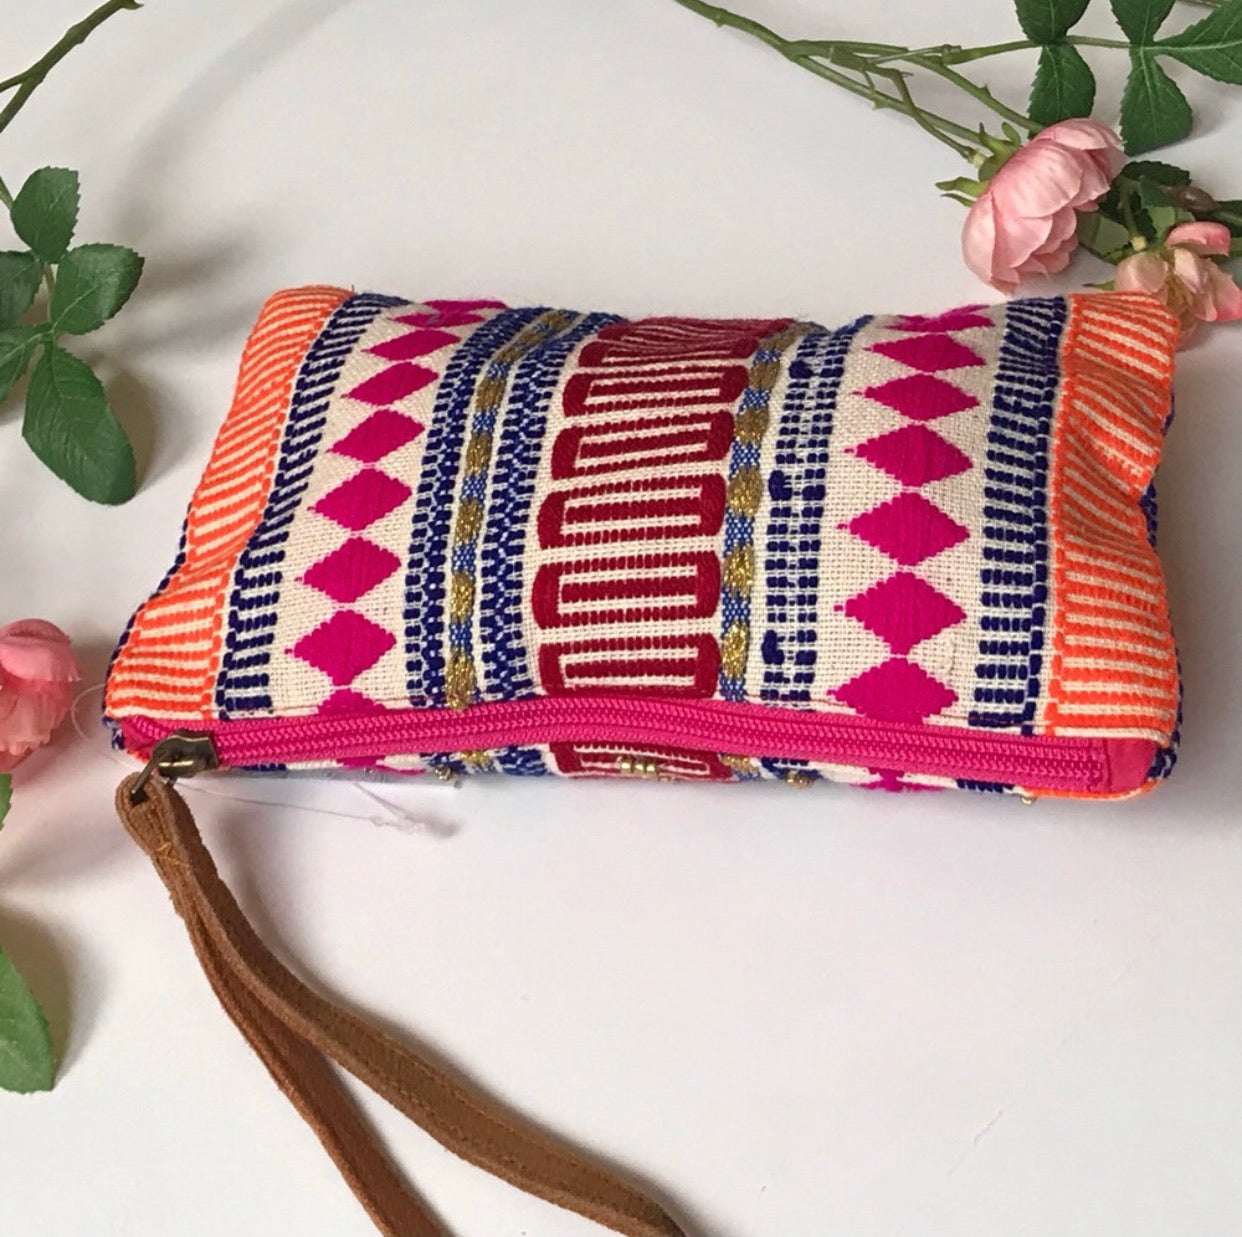 clutch wristlet wallet pouch ethnic bold beaded bag - The Lotus Wave 